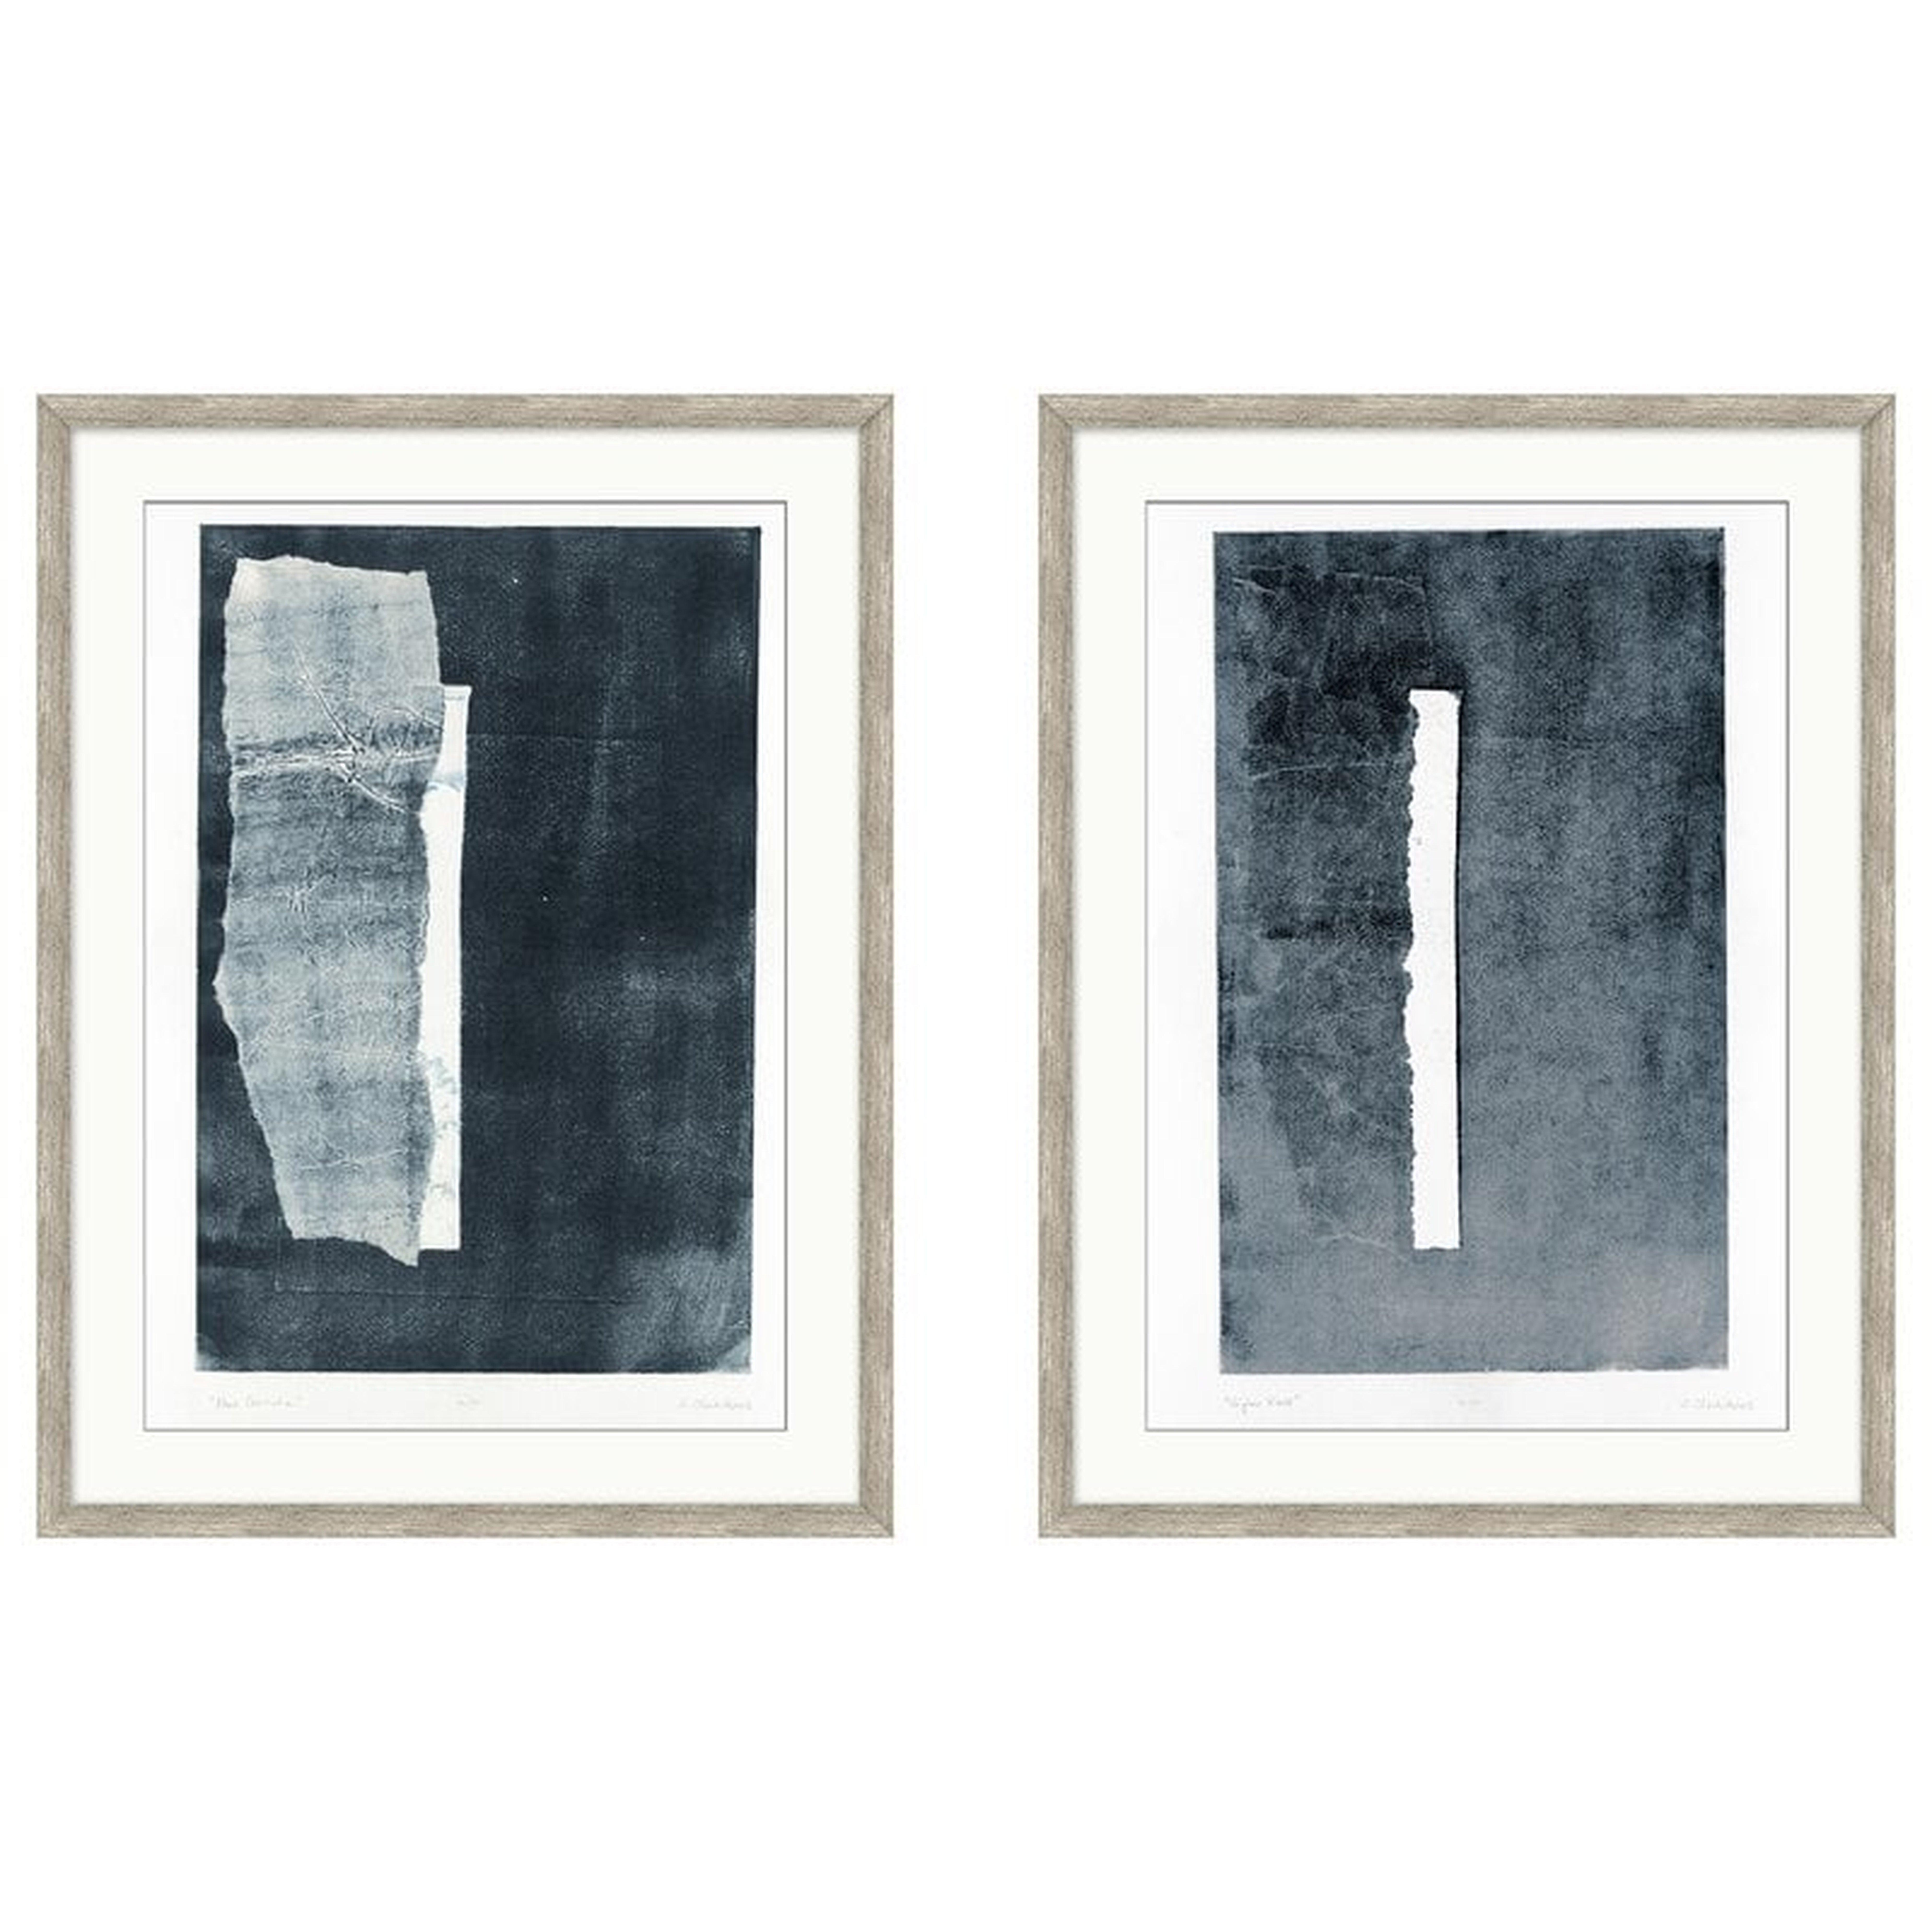 New Conviction - 2 Piece Picture Frame Graphic Art Print Set on Paper - Perigold